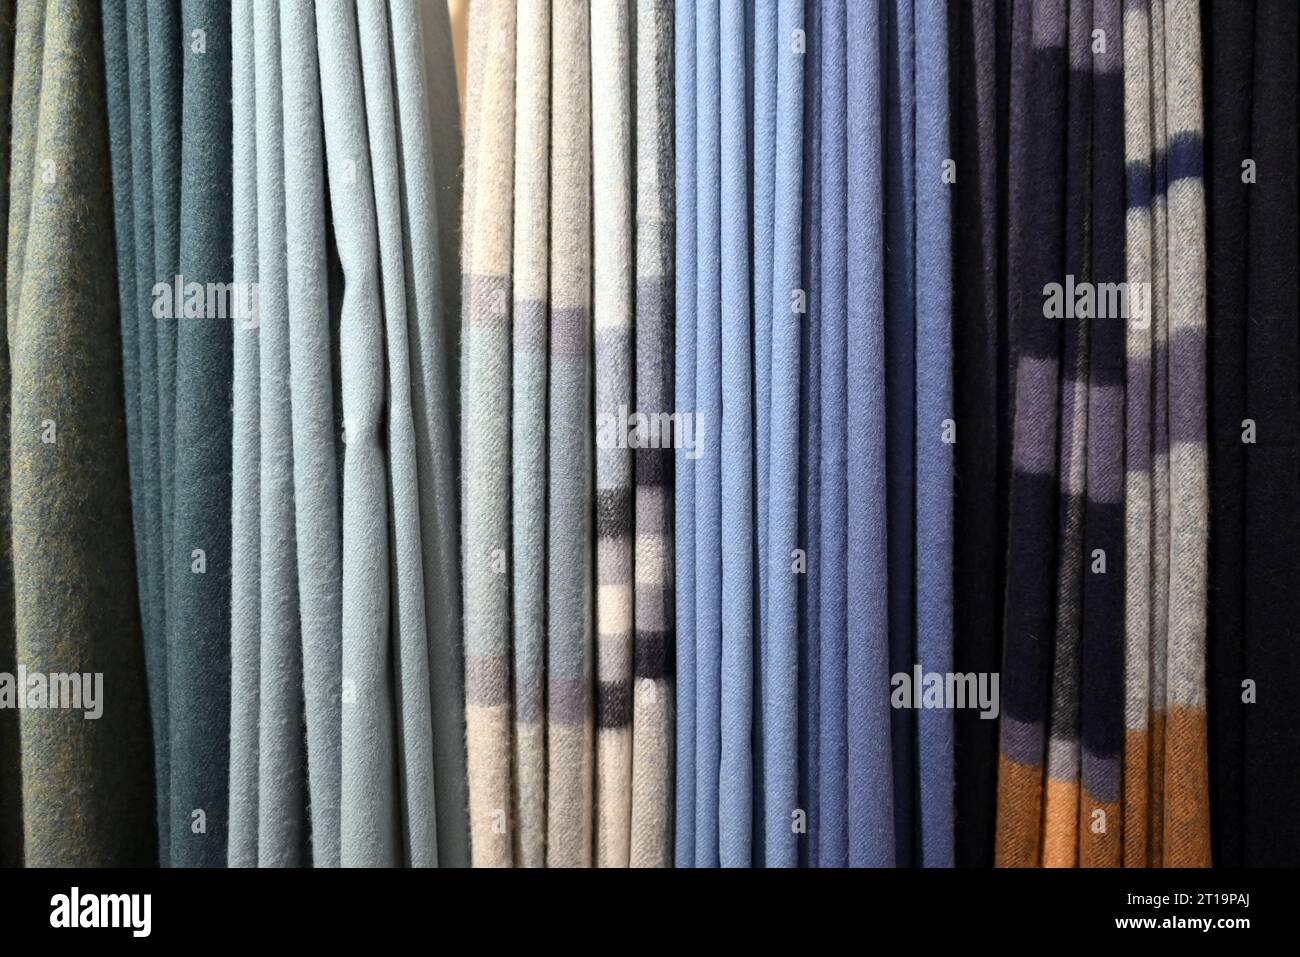 Samples of the Johnstons casmere production company in Elgin, Scotland.  This company is worldwide known for the quality of its production. Stock Photo